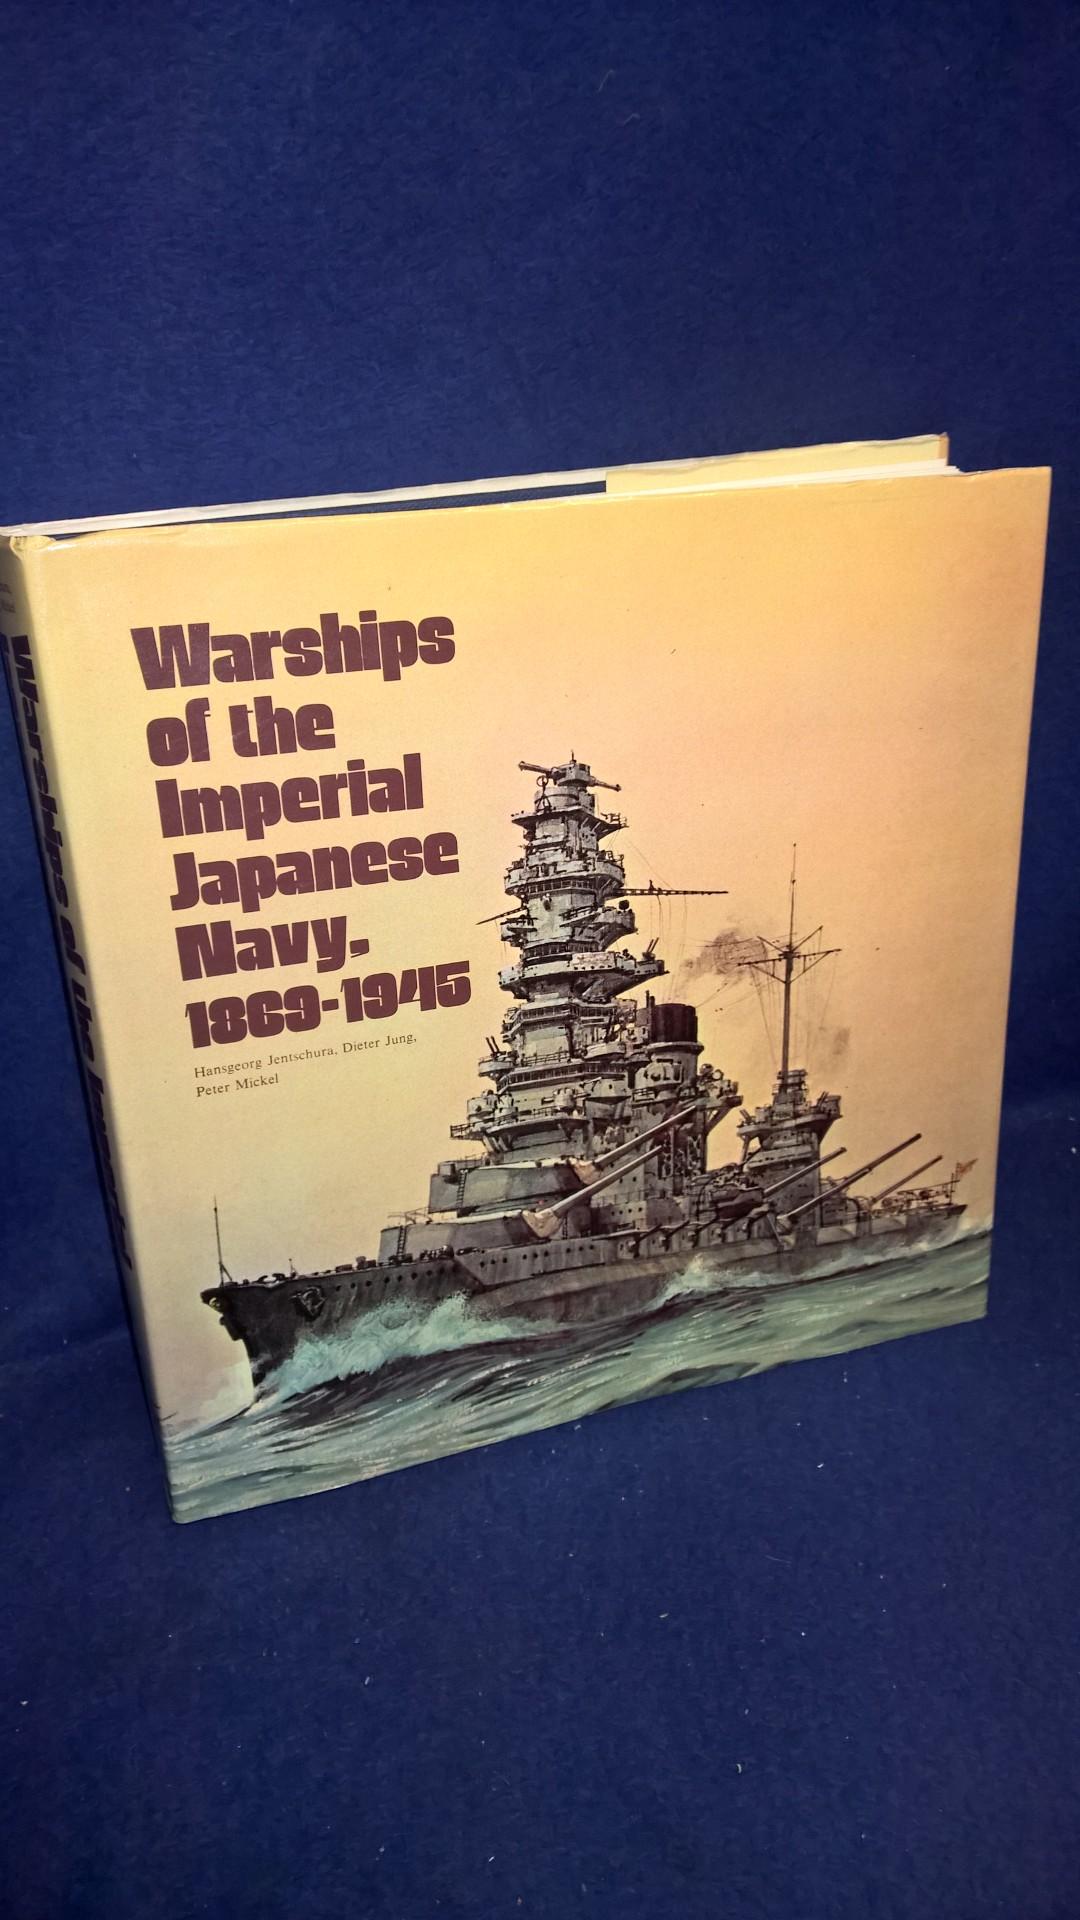 Warships of the Imperial Japanese Navy, 1869-1945.